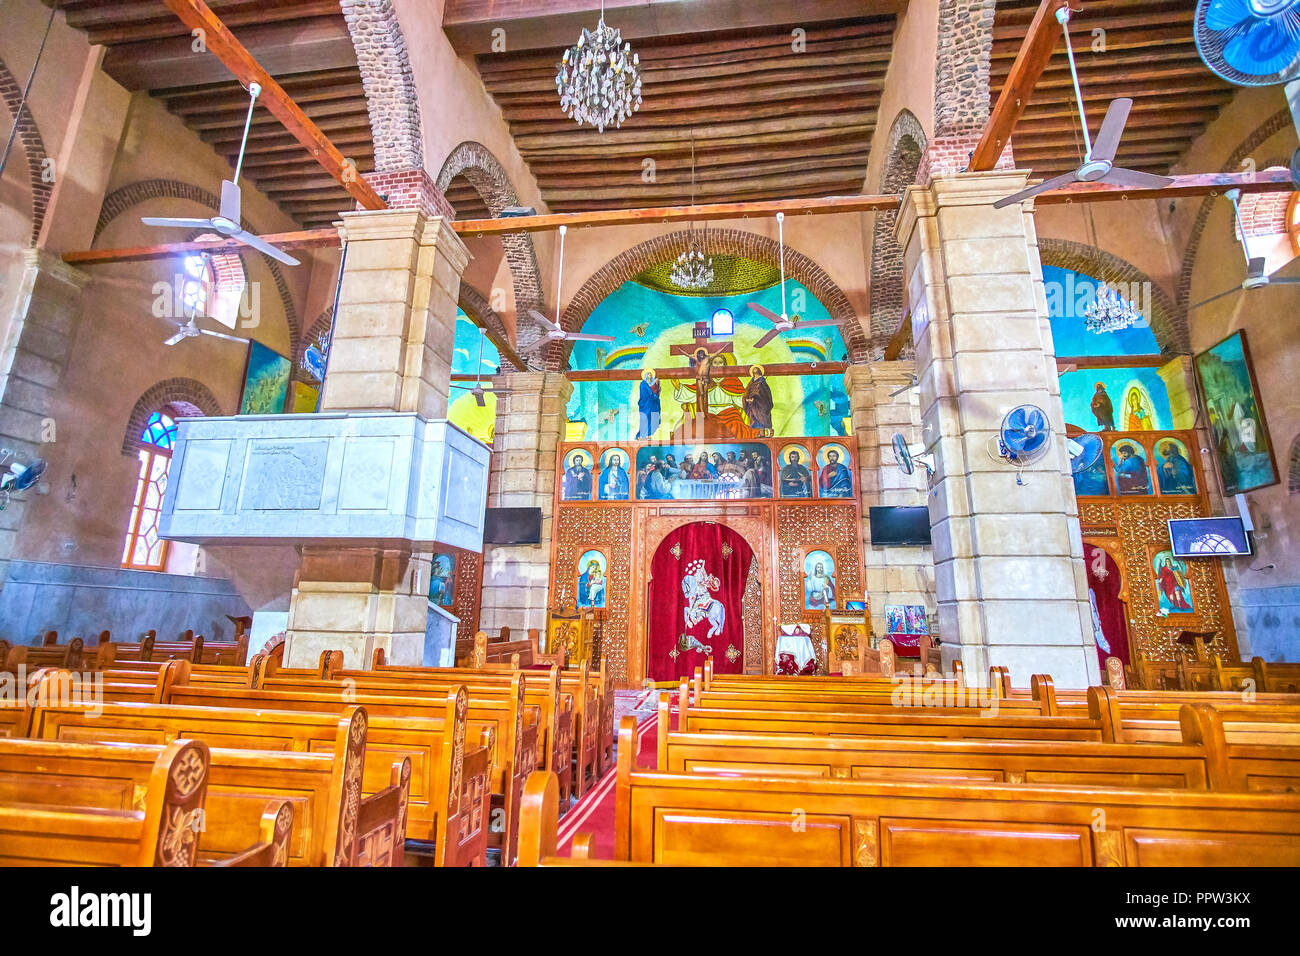 CAIRO, EGYPT - DECEMBER 23, 2017:The interior of Great Martyr St George Church in Coptic district of Cairo, on December 23 in Cairo. Stock Photo